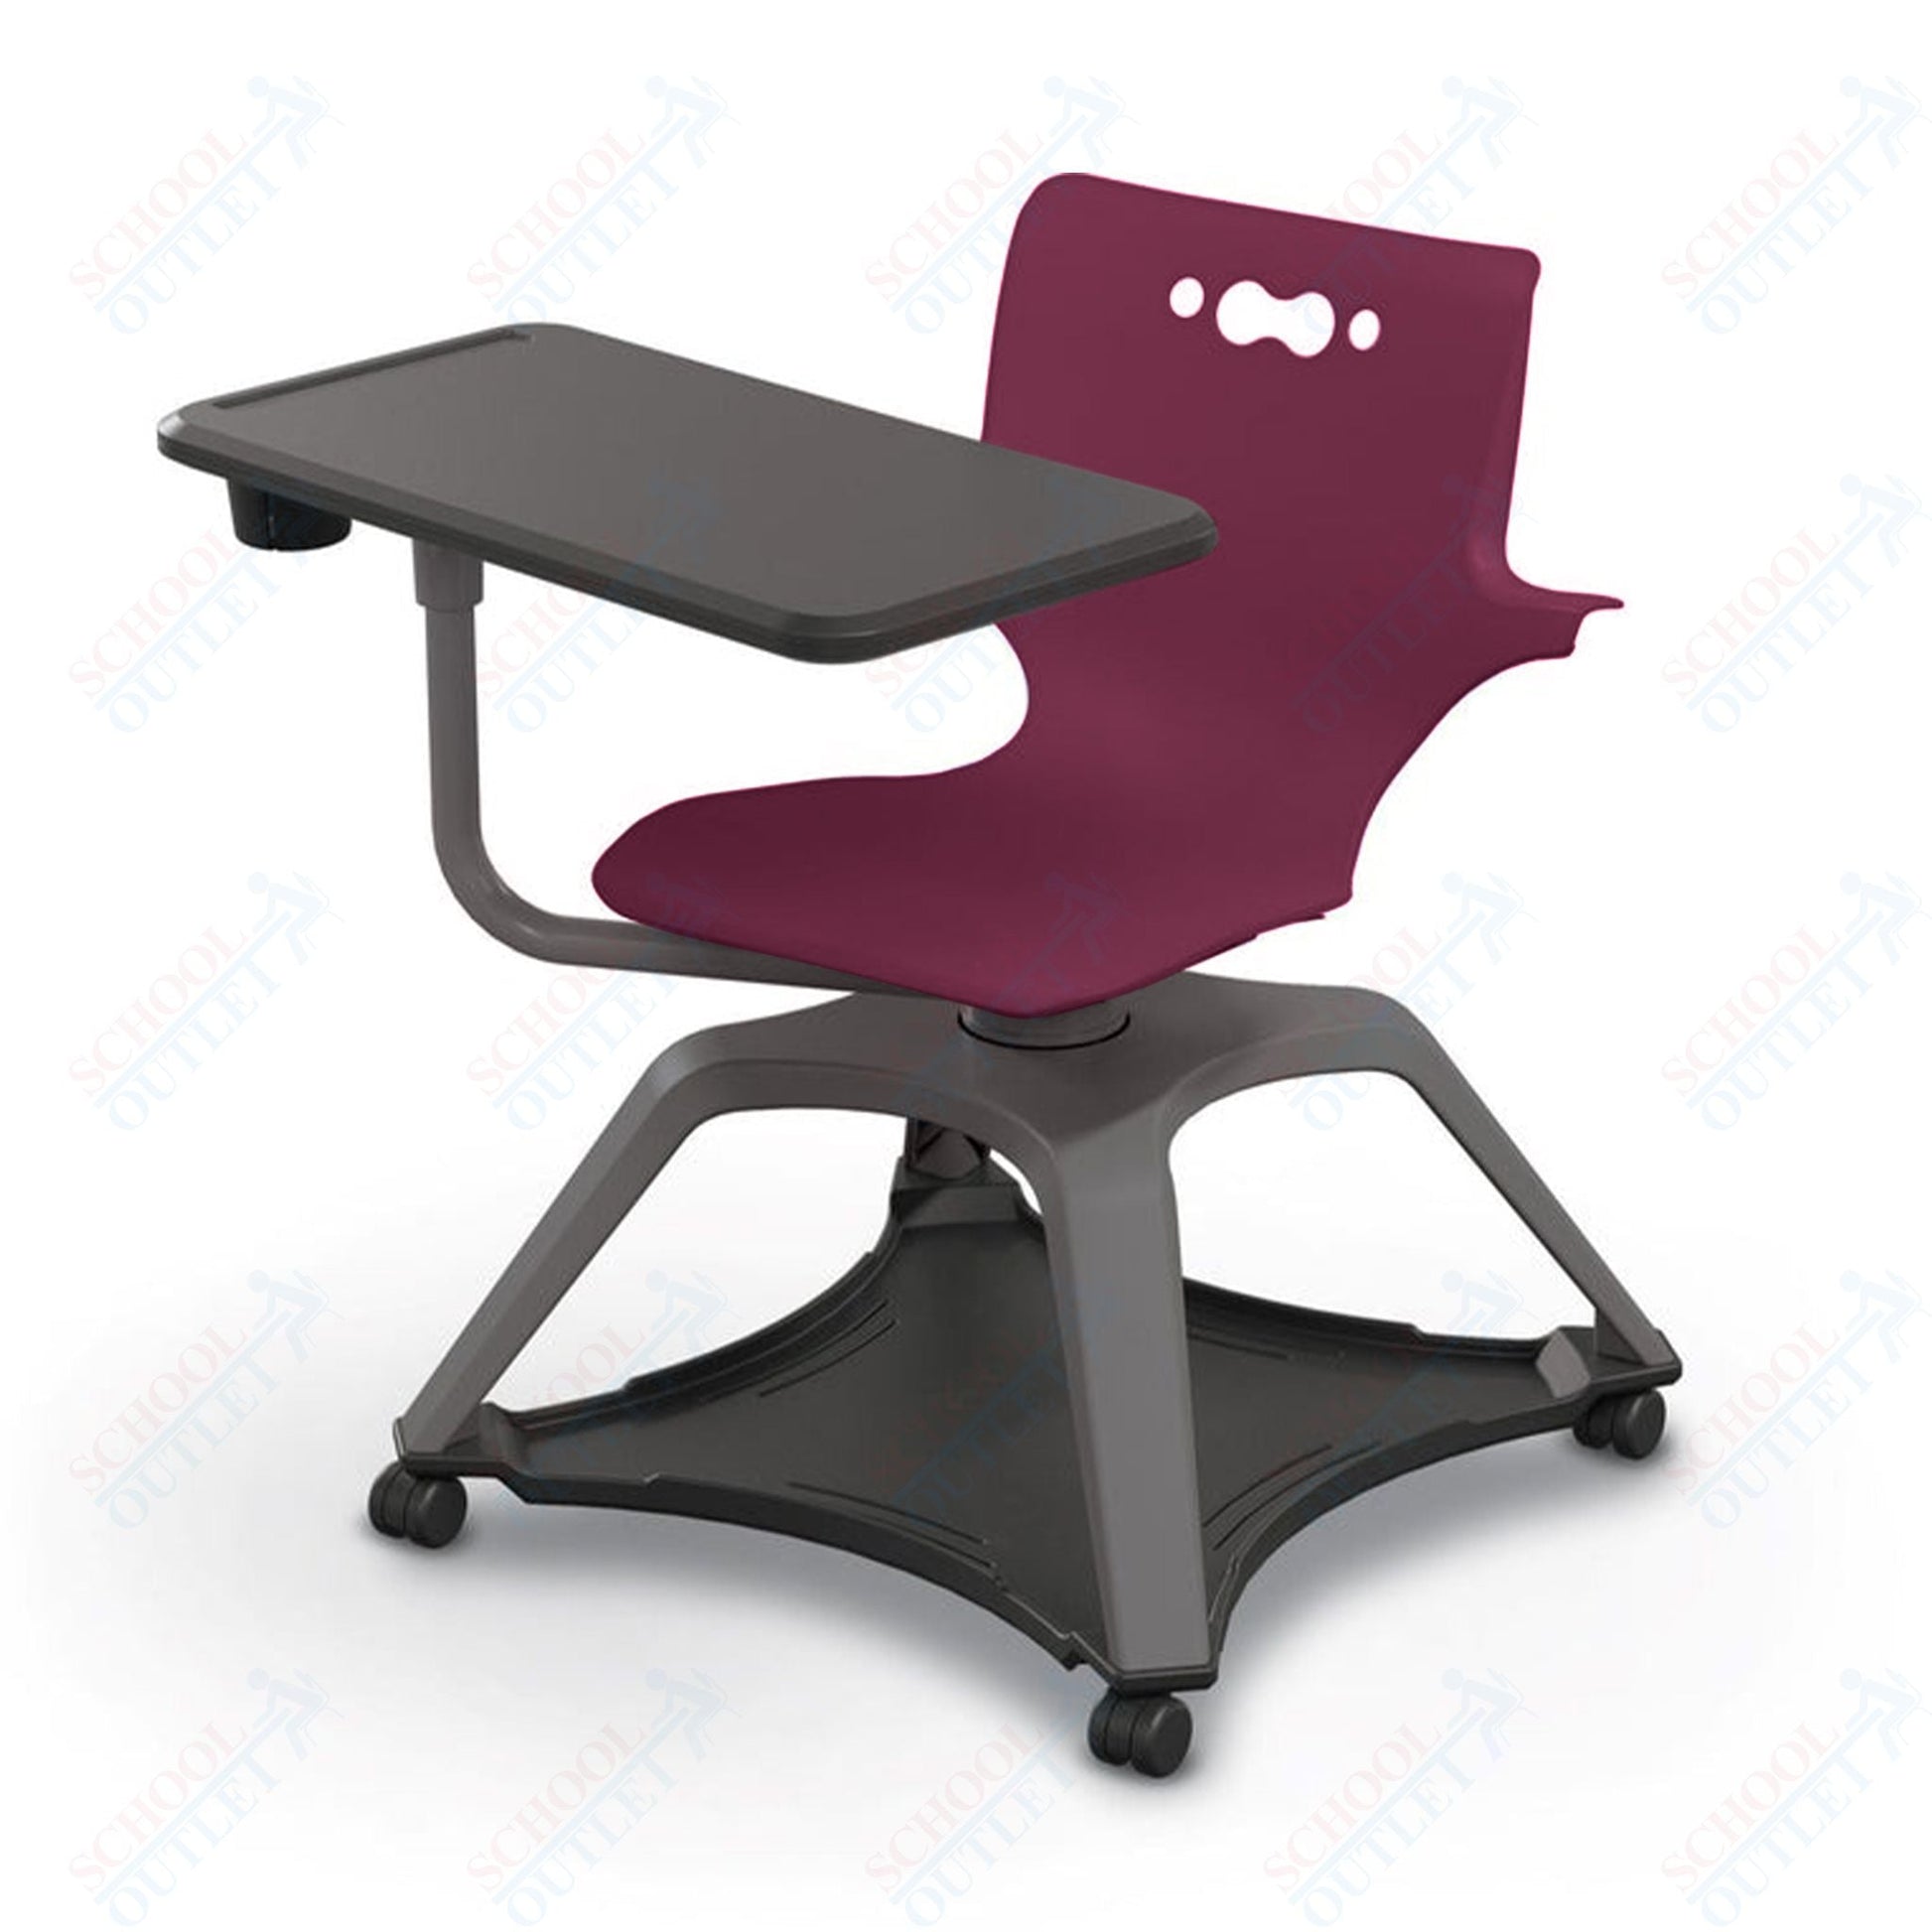 MooreCo Hierarchy Enroll Series Mobile Tablet Arm Chair Desk with Arms (54325 - XXXX - WA - XX - XX) - SchoolOutlet